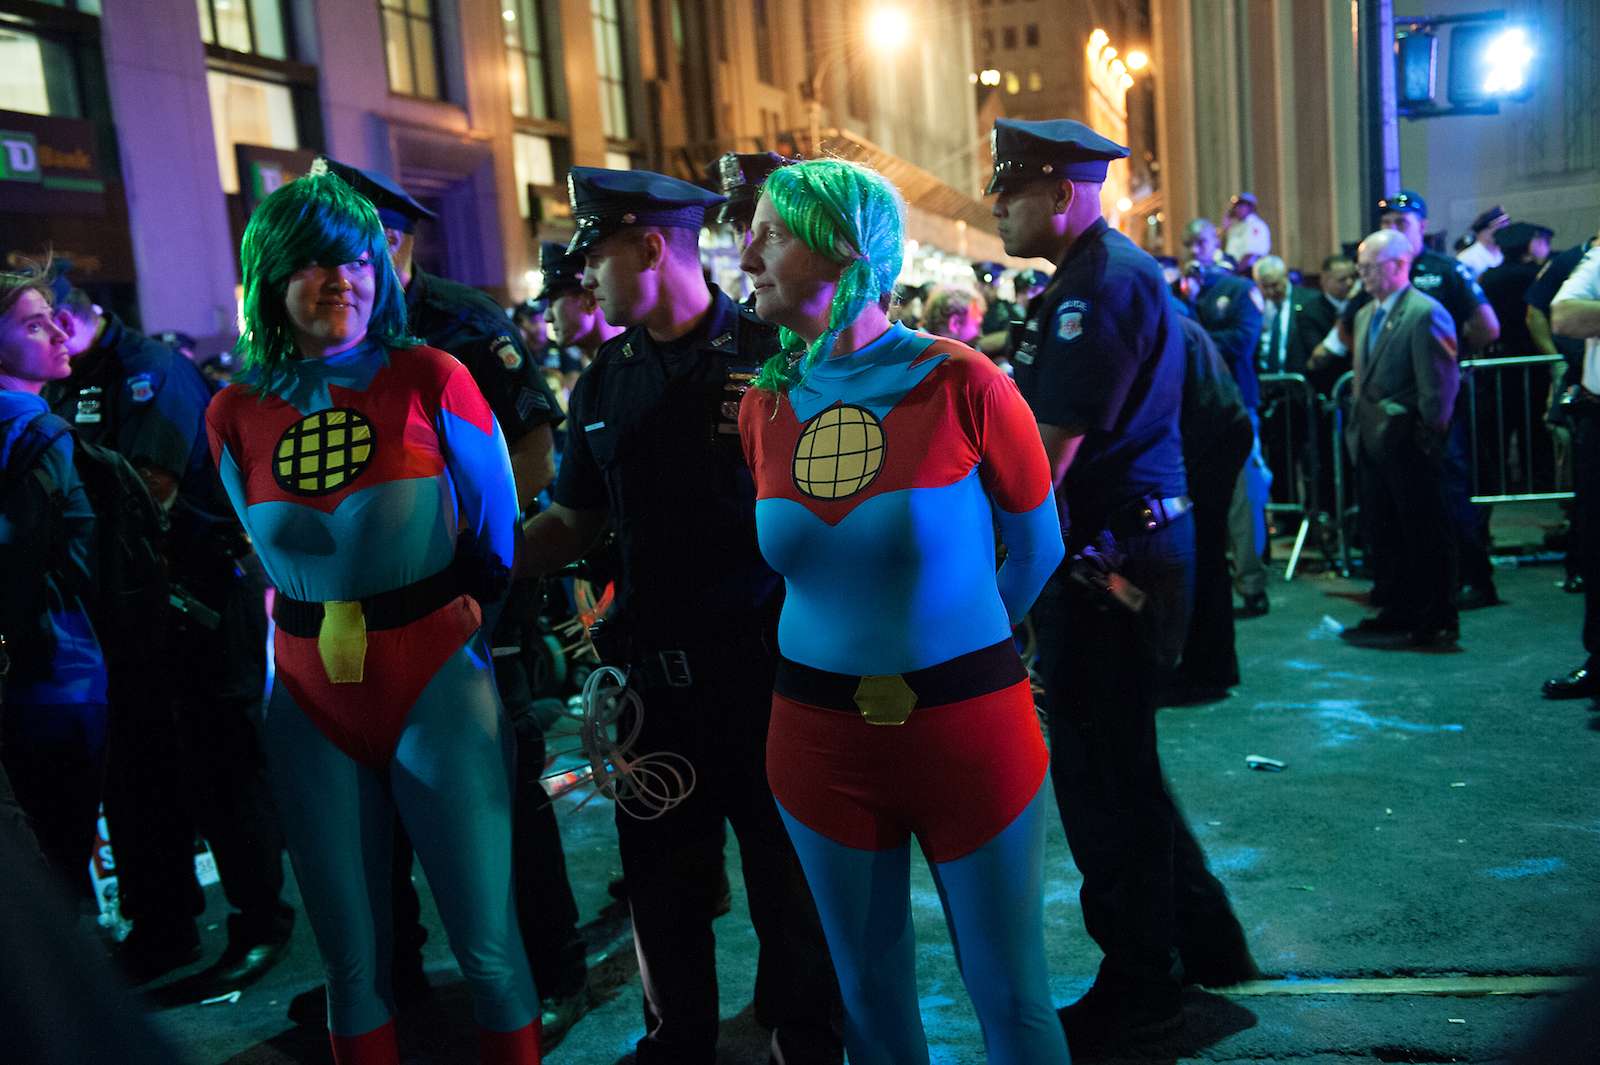 a night scene: two women in blue tights, green wigs, and red shorts are handcuffed by police on the street